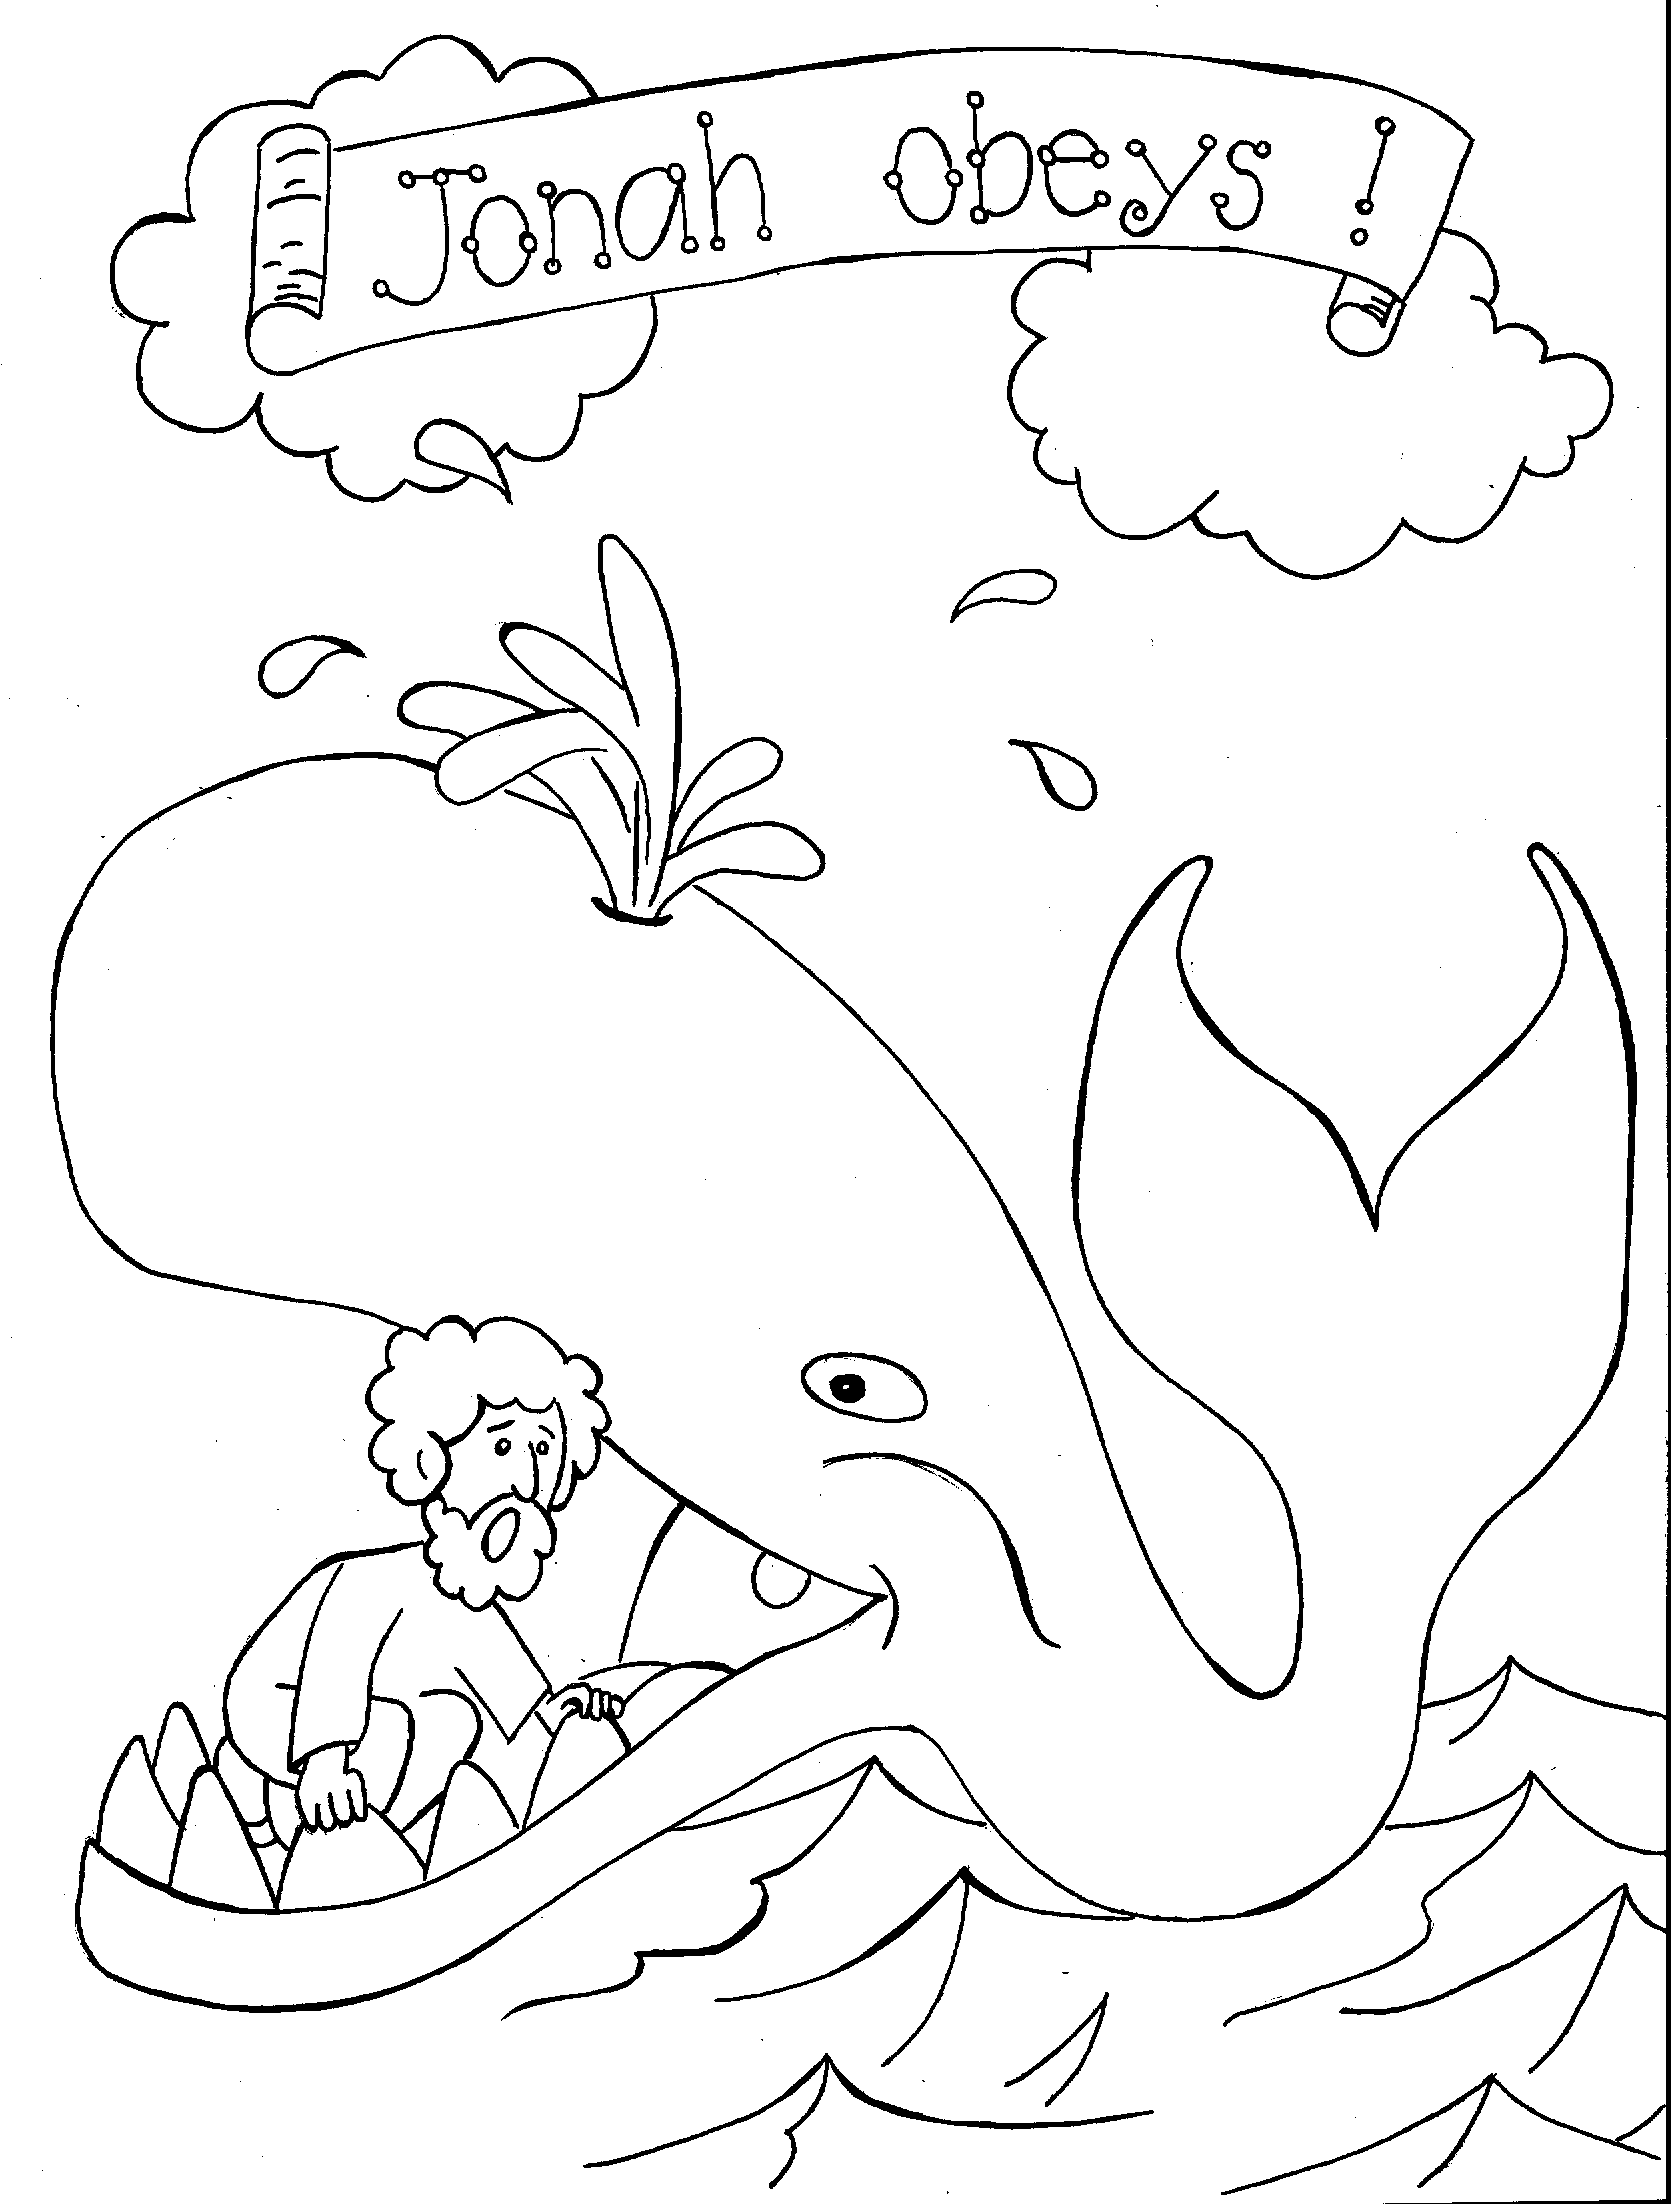 bible story coloring pages jonah Coloring4free